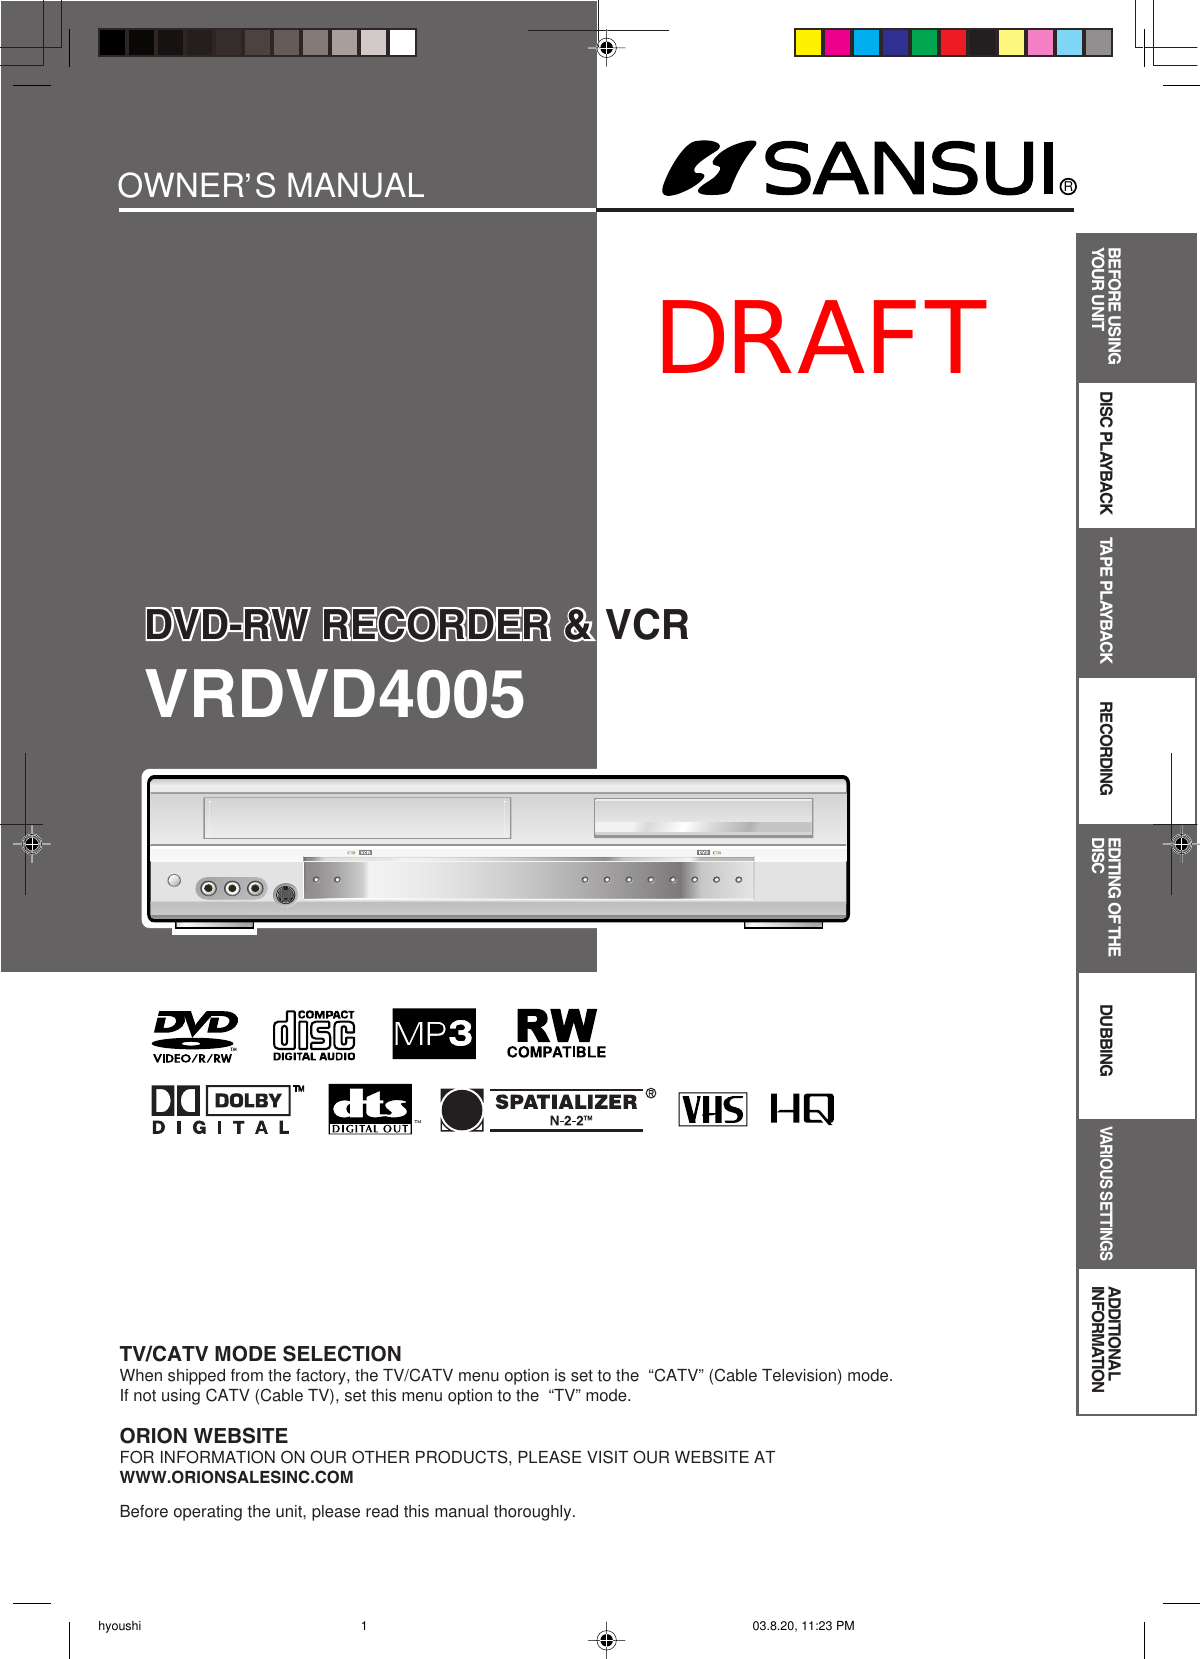 DVD-RW RECORDER &amp; VCRRDVD-RW RECORDER &amp; VCROWNER S MANUALBefore operating the unit, please read this manual thoroughly.TV/CATV MODE SELECTIONWhen shipped from the factory, the TV/CATV menu option is set to the  “CATV” (Cable Television) mode.If not using CATV (Cable TV), set this menu option to the  “TV” mode.ORION WEBSITEFOR INFORMATION ON OUR OTHER PRODUCTS, PLEASE VISIT OUR WEBSITE ATWWW.ORIONSALESINC.COMVRDVD4005BEFORE USINGYOUR UNIT DISC PLAYBACK TAPE PLAYBACK RECORDING DUBBINGVARIOUS SETTINGSADDITIONAL INFORMATIONEDITING OF THE DISC, hyoushi 03.8.20, 11:23 PM1DRAFT